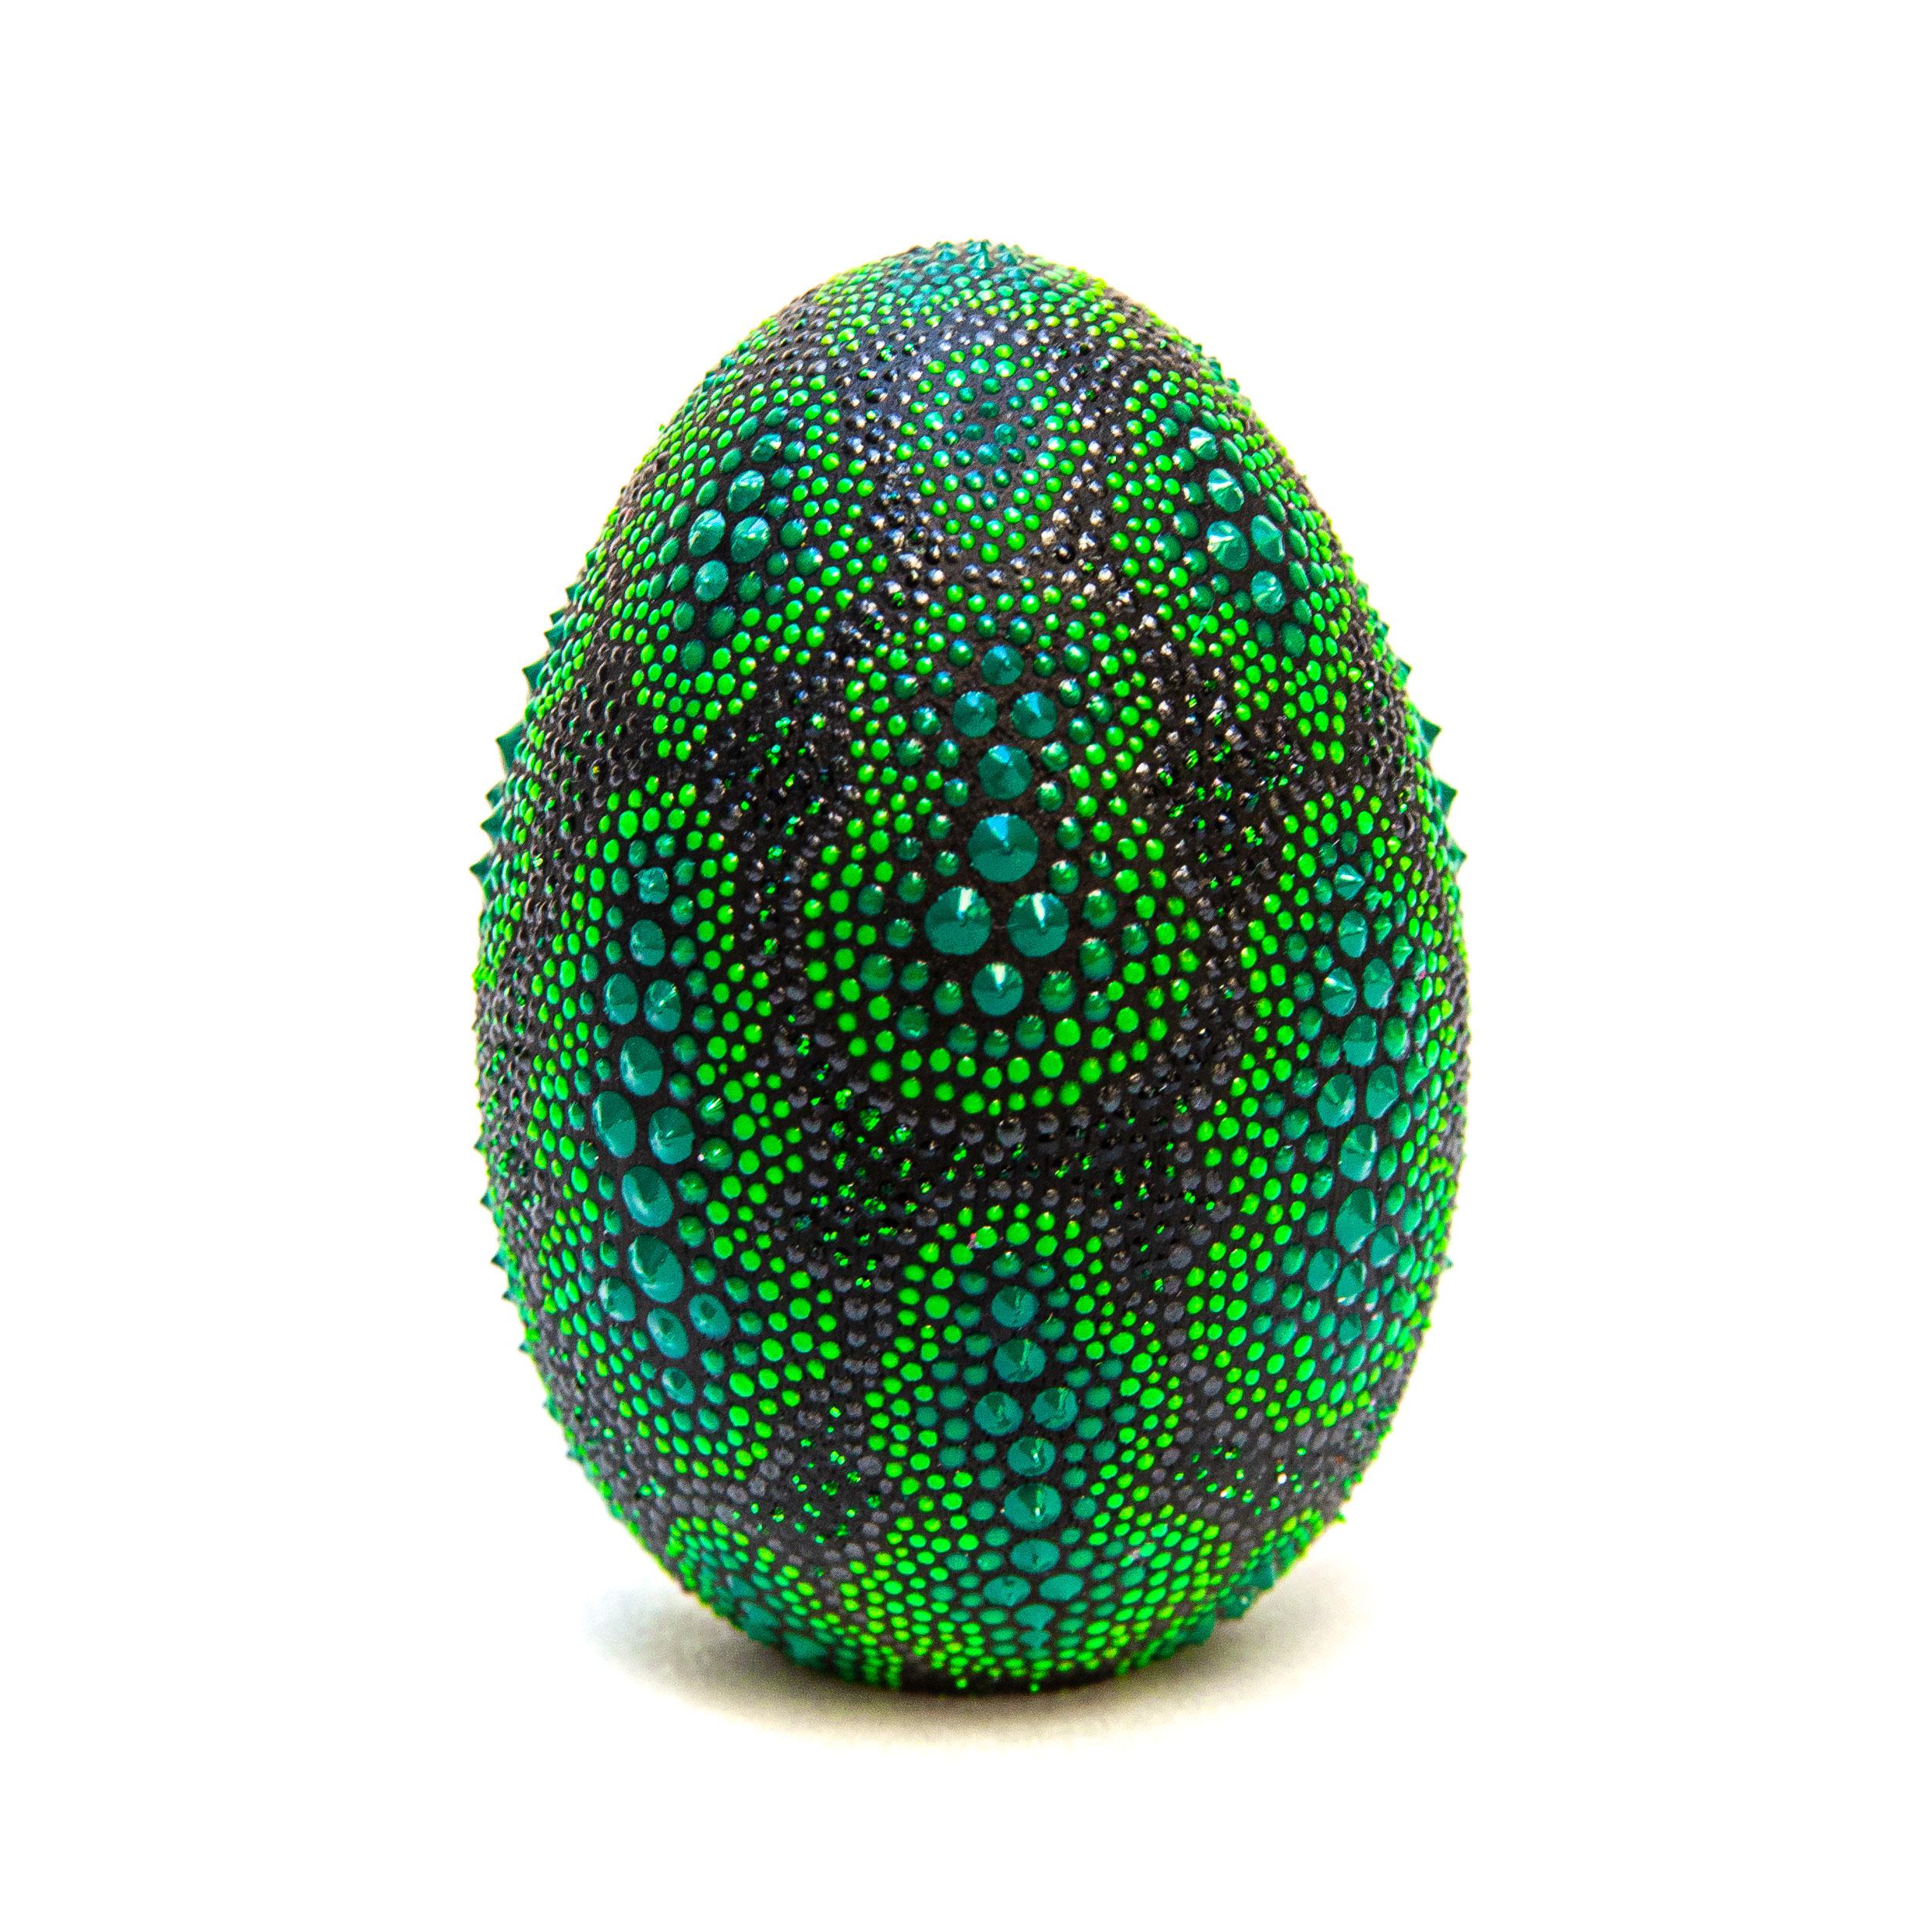 This free-standing sculpture titled "Slytherin Egg" is an original artwork by PJ Linden made of acrylic, dimensional paint, and wood. The piece measures 2.5"h x 1.75"w x 1.75"d.

Please note: artwork will be on display through March 21, 2020 and